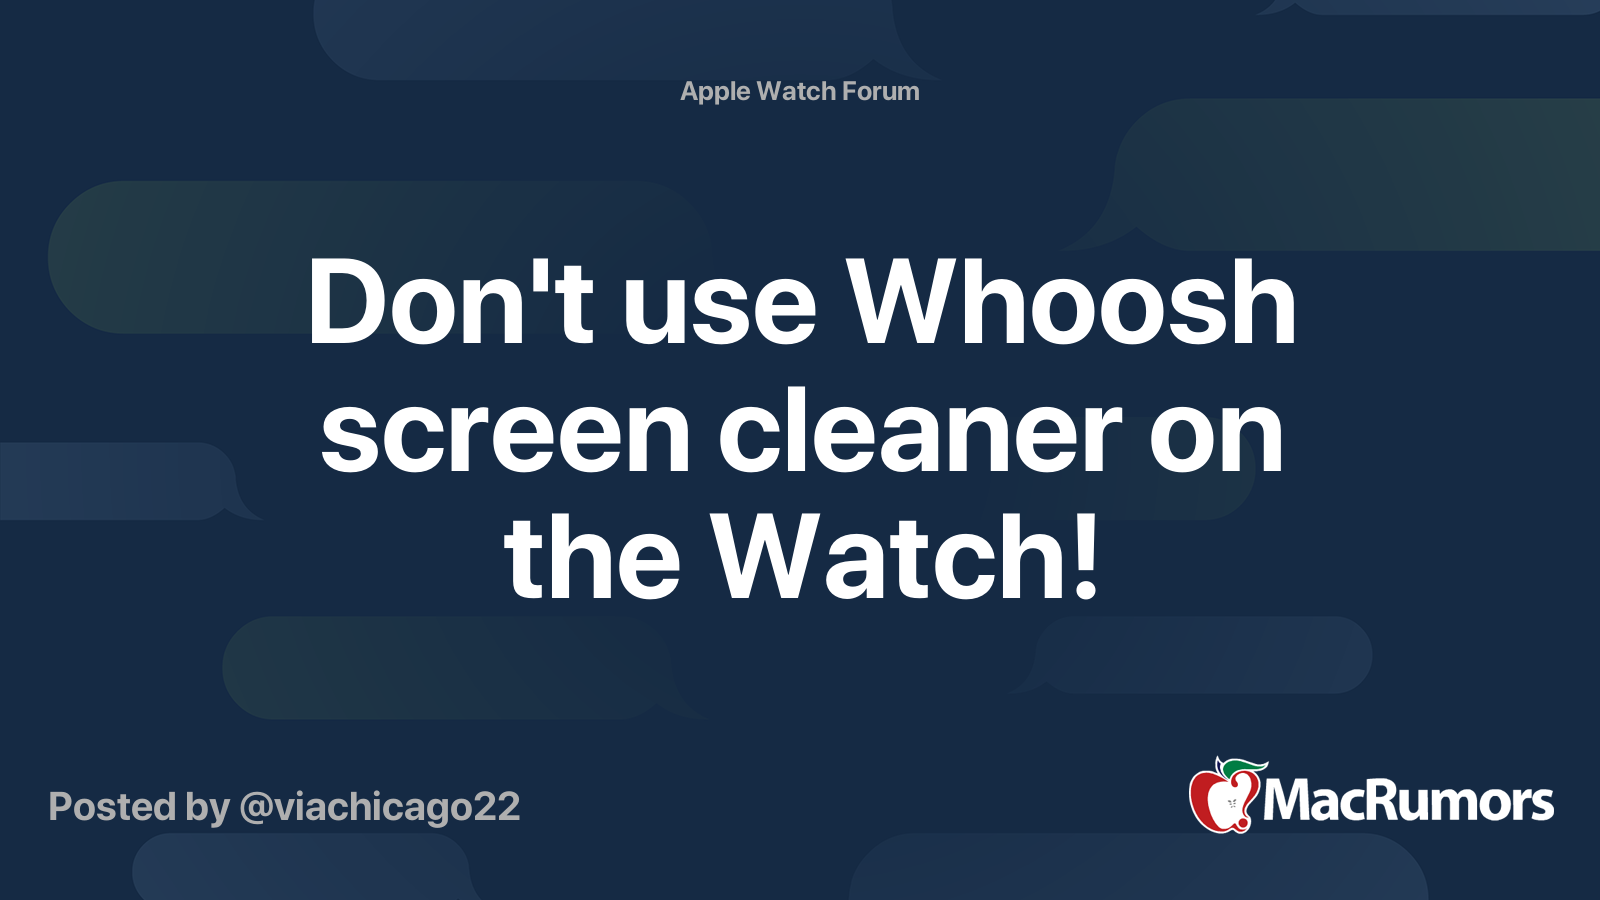 Don't use Whoosh screen cleaner on the Watch!